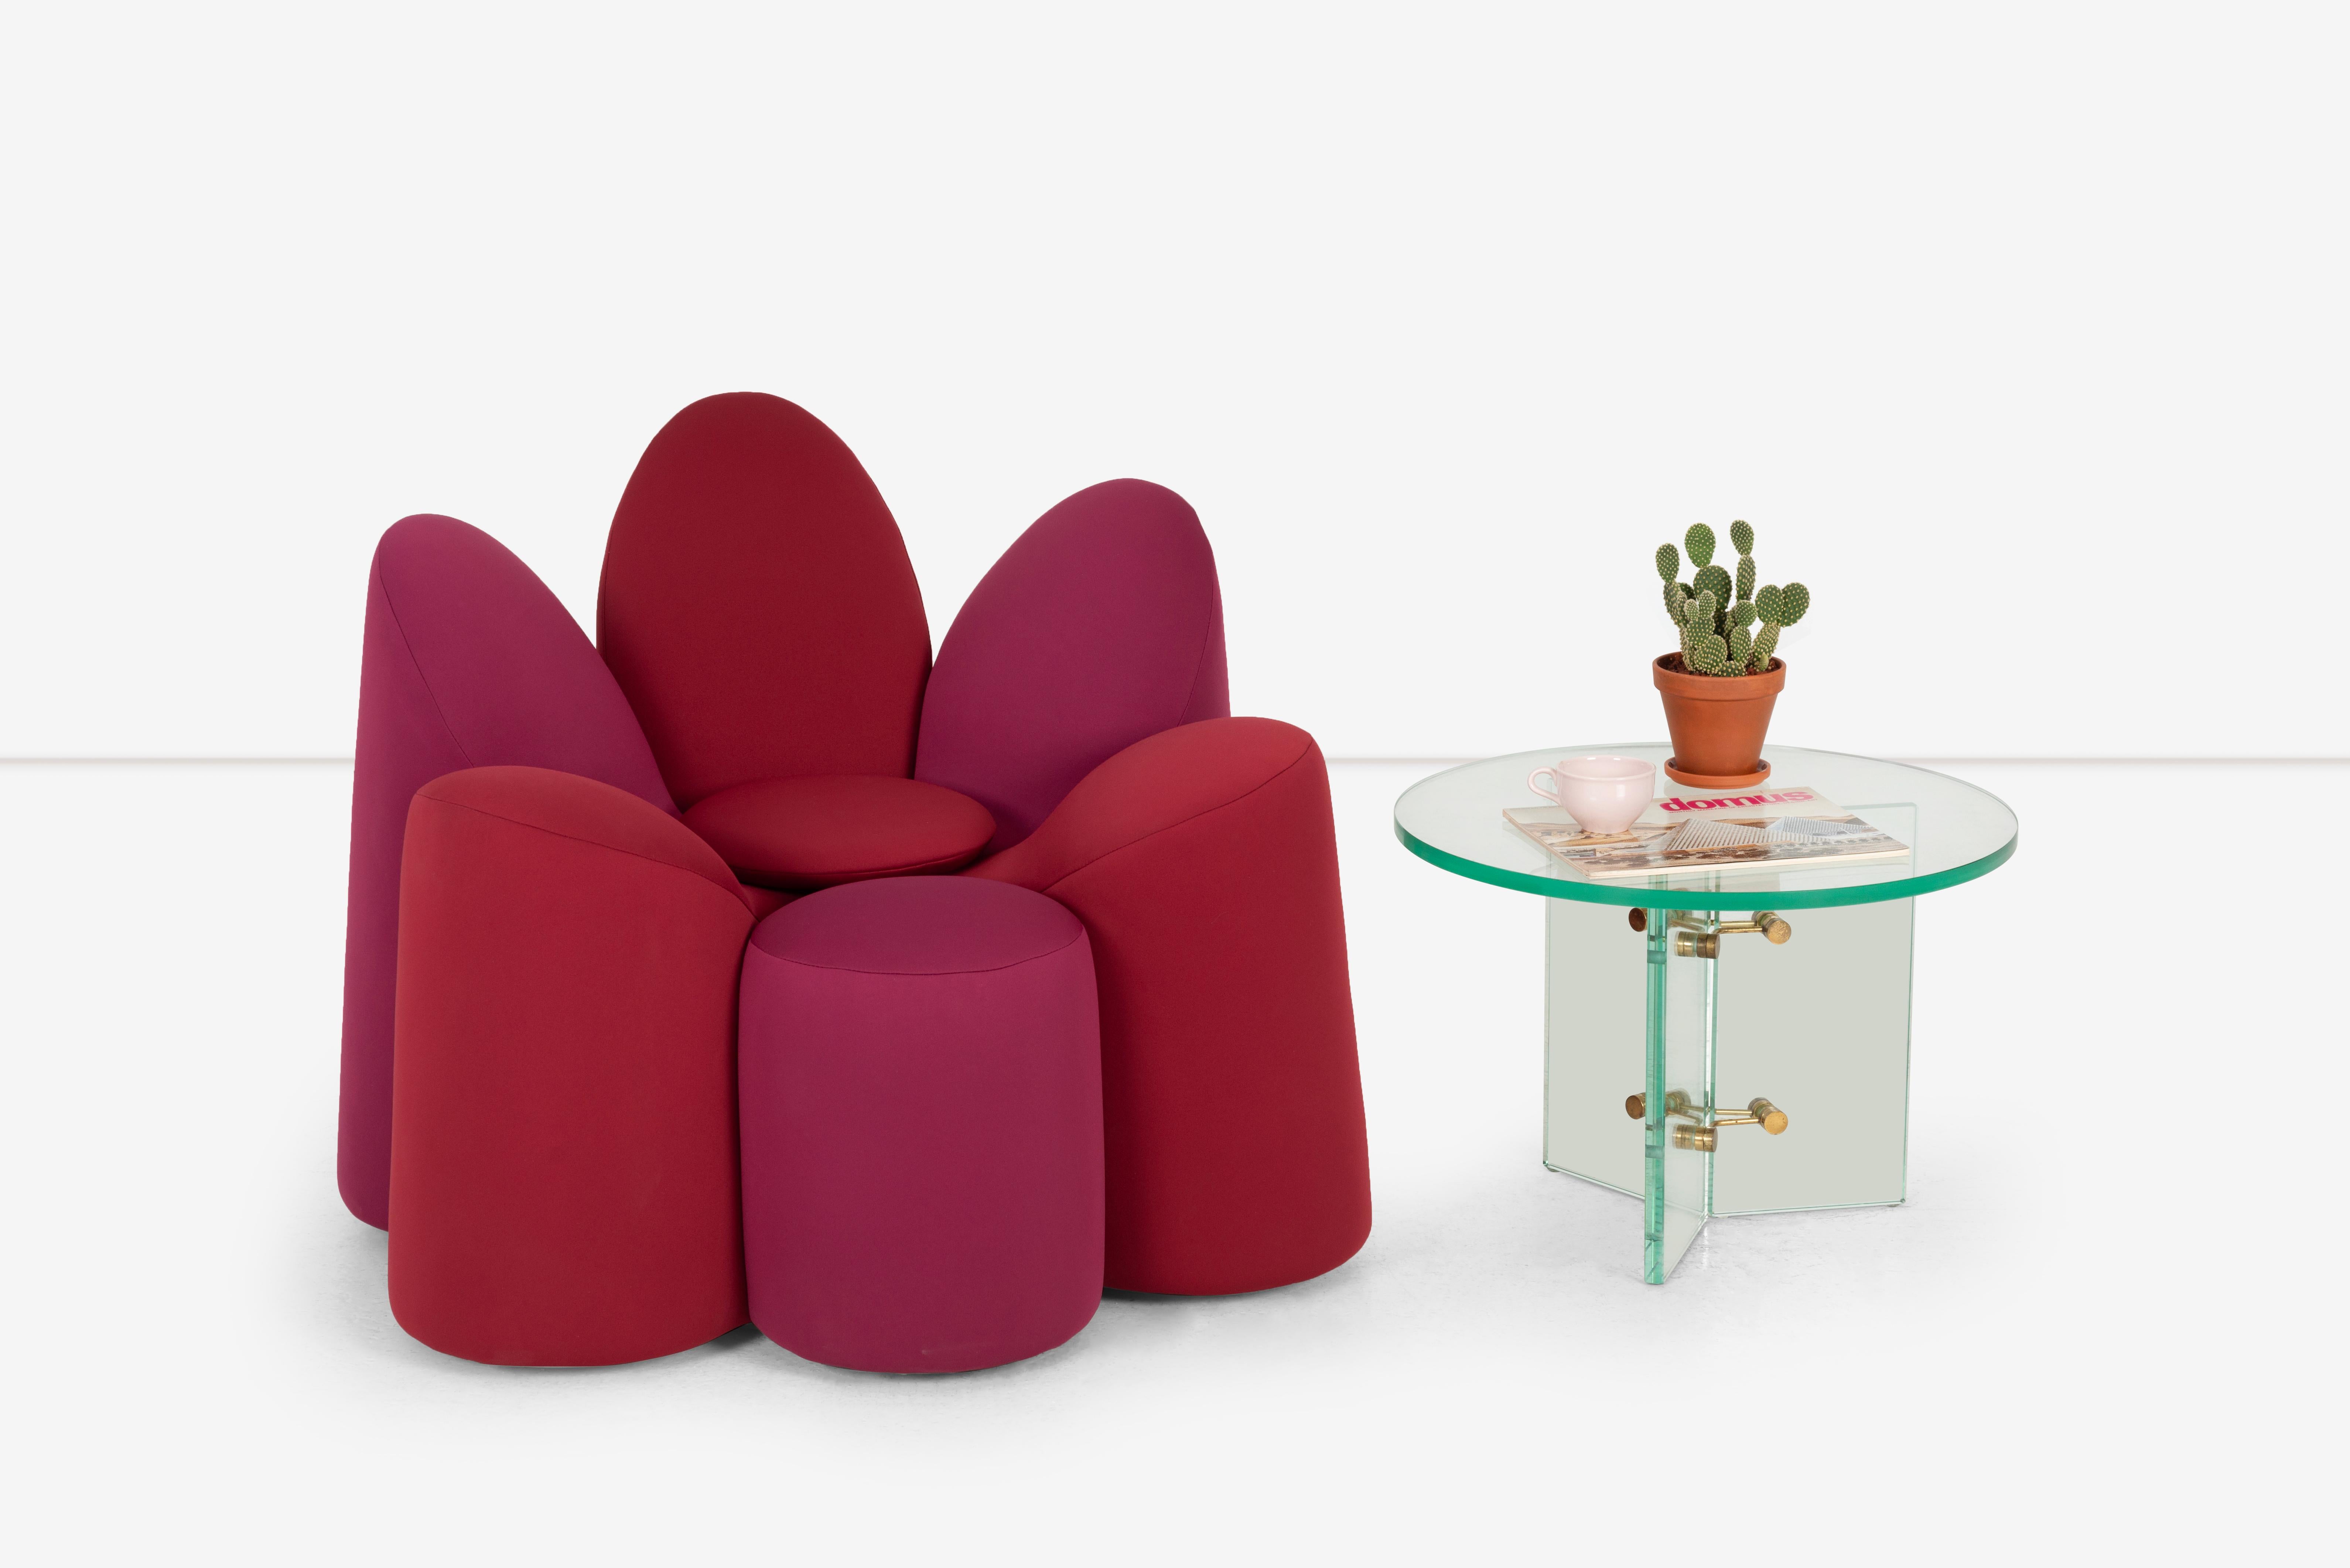 This Chair by Fabrice Berrux, for Roche Bobois was designed as part of their Collection les Contemporains in the 2010 Salone del Mobile. Comprised of 6 